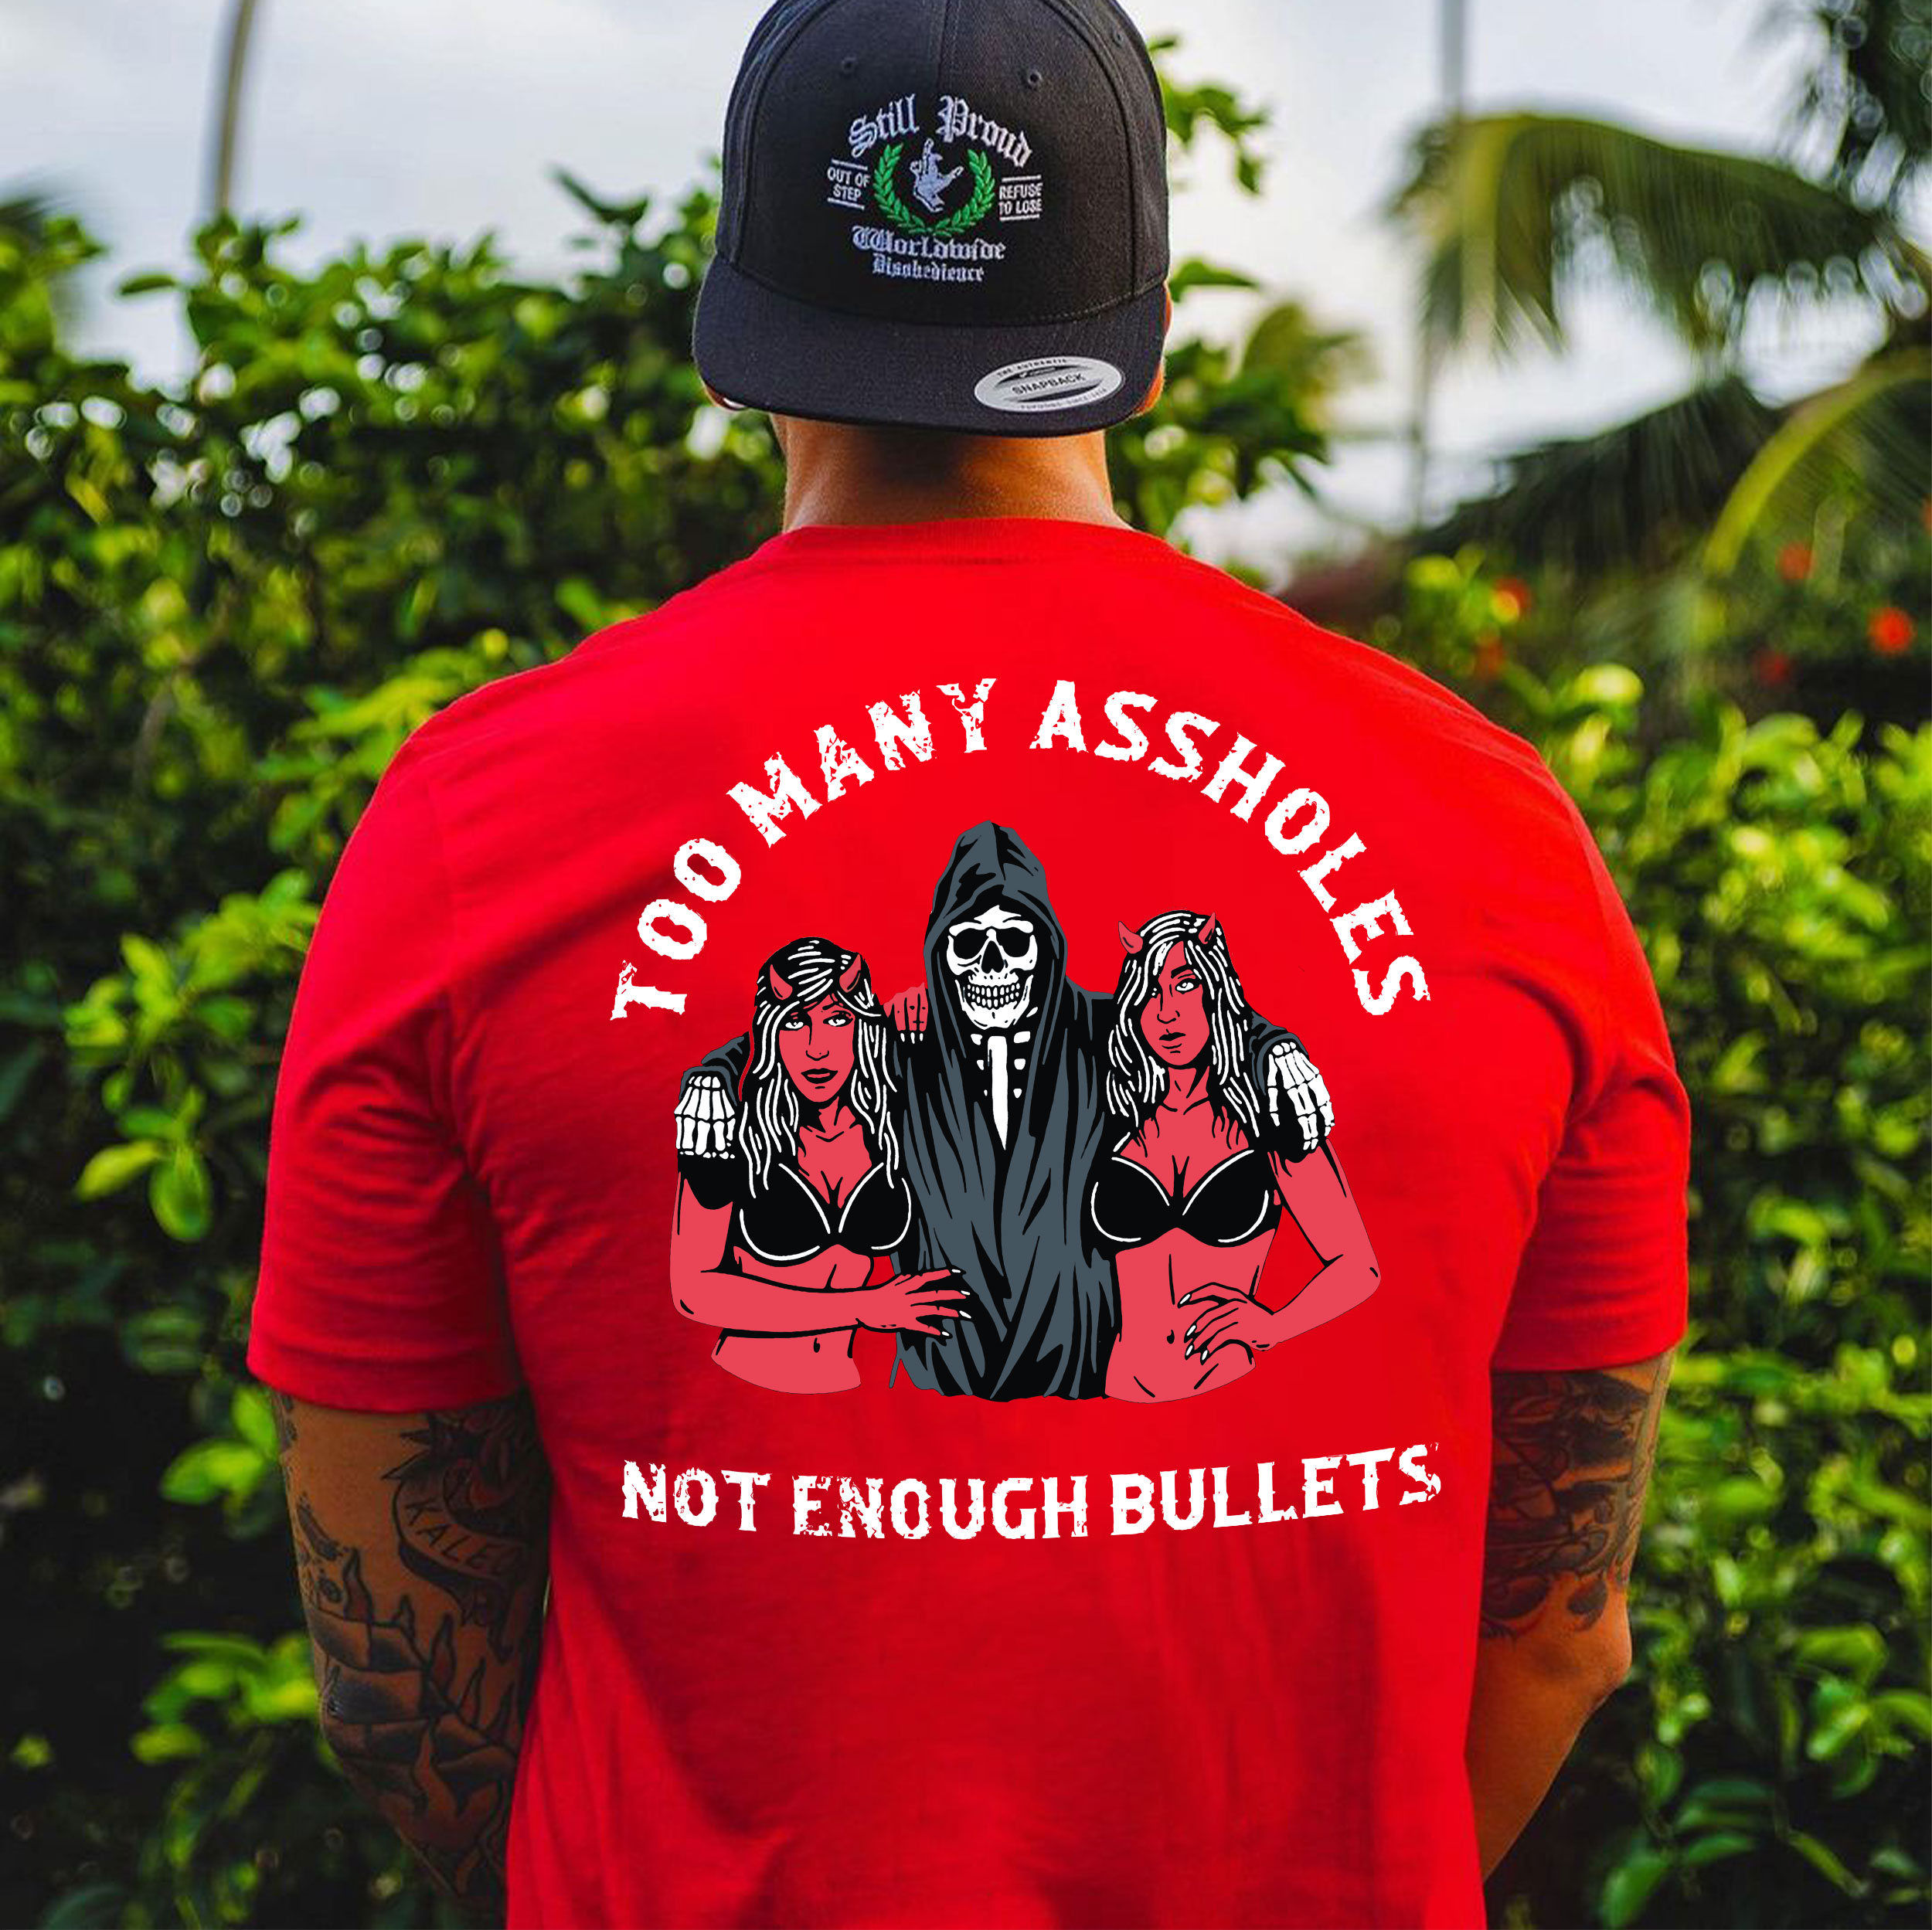 TOO MANY ASSHOLES NOT ENOUGH BULLETS Skeleton With Sexy Lady Print Men's T-shirt